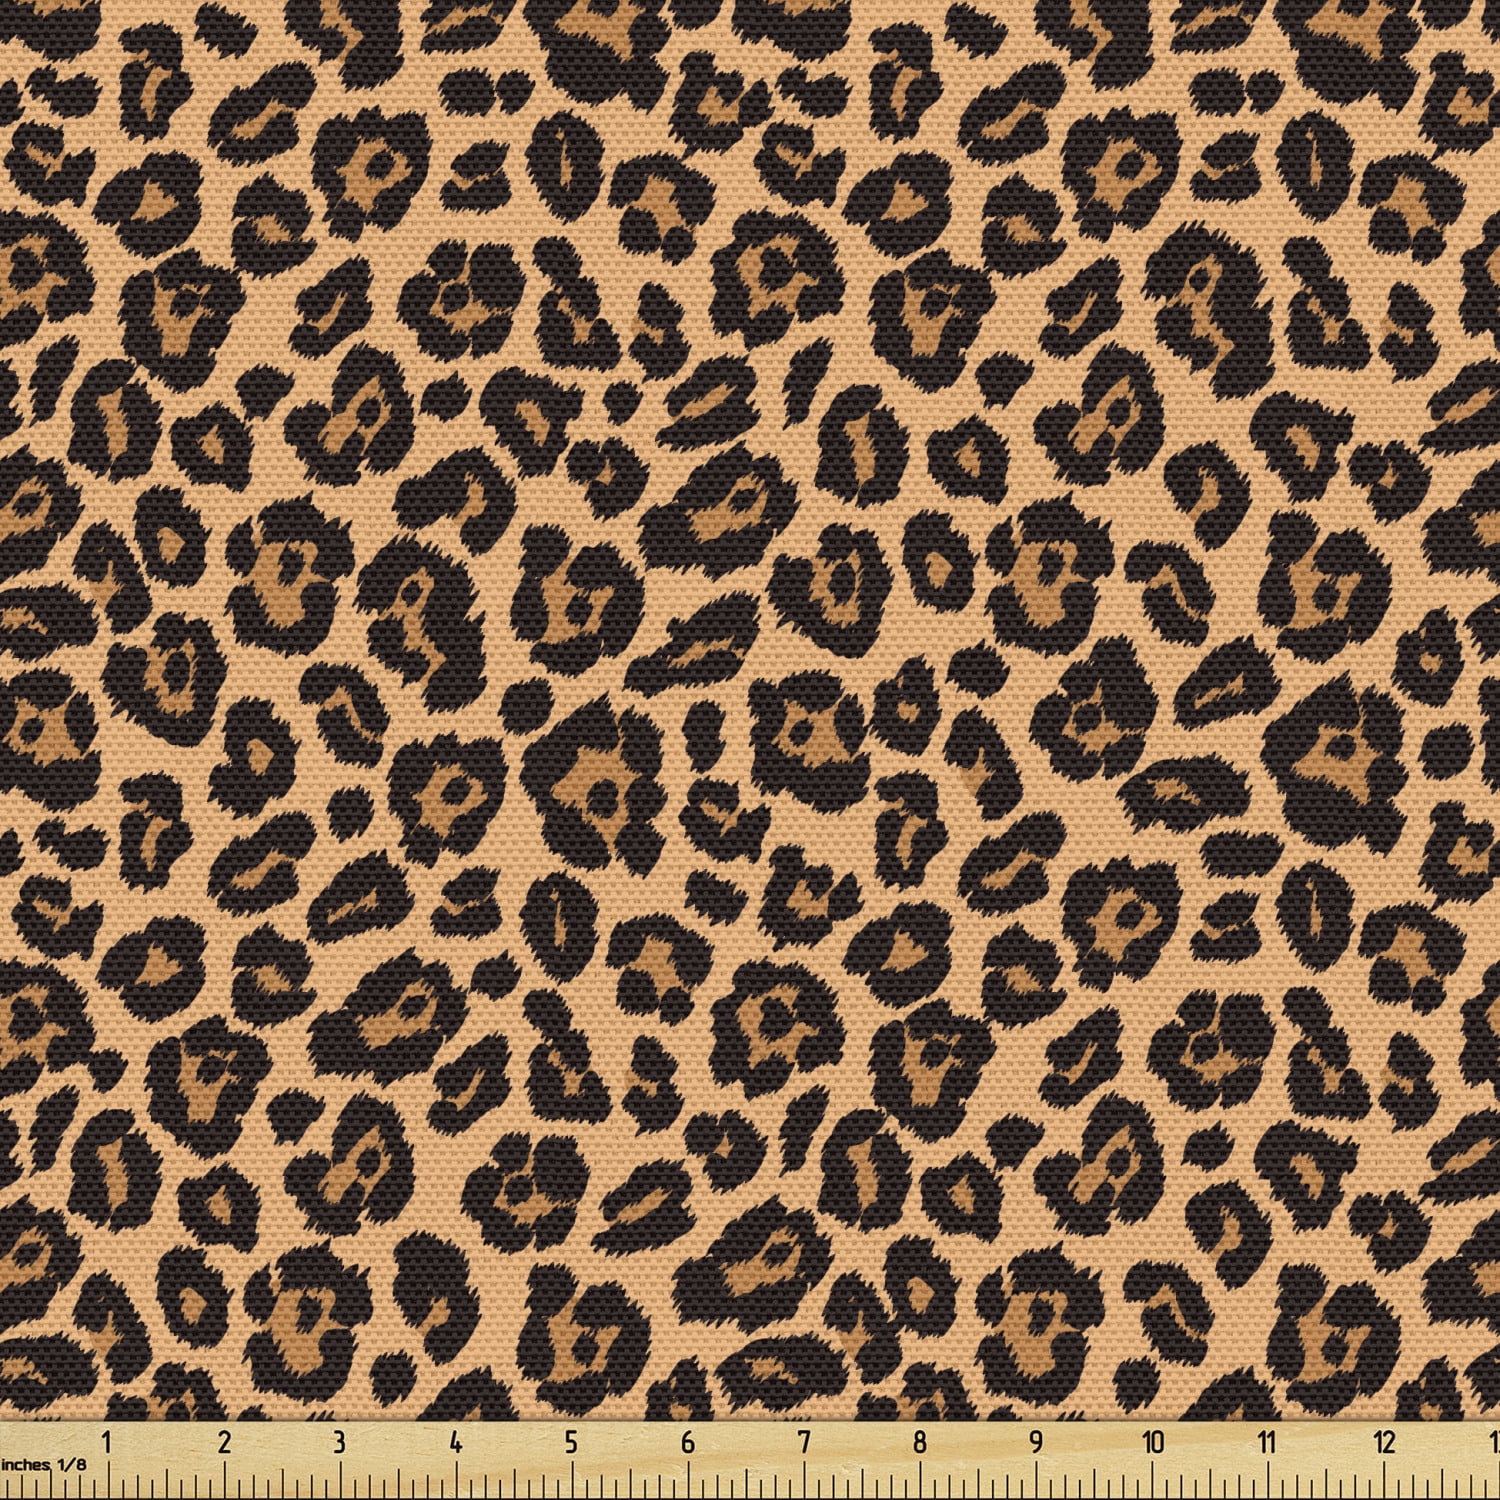 prik Identificere svært Leopard Print Fabric by the Yard, Pale Orange Background with Leopard Spots  Illustration Exotic Fauna Pattern, Decorative Upholstery Fabric for Sofas  Home Accents, 3 Yards, Orange Black by Ambesonne - Walmart.com